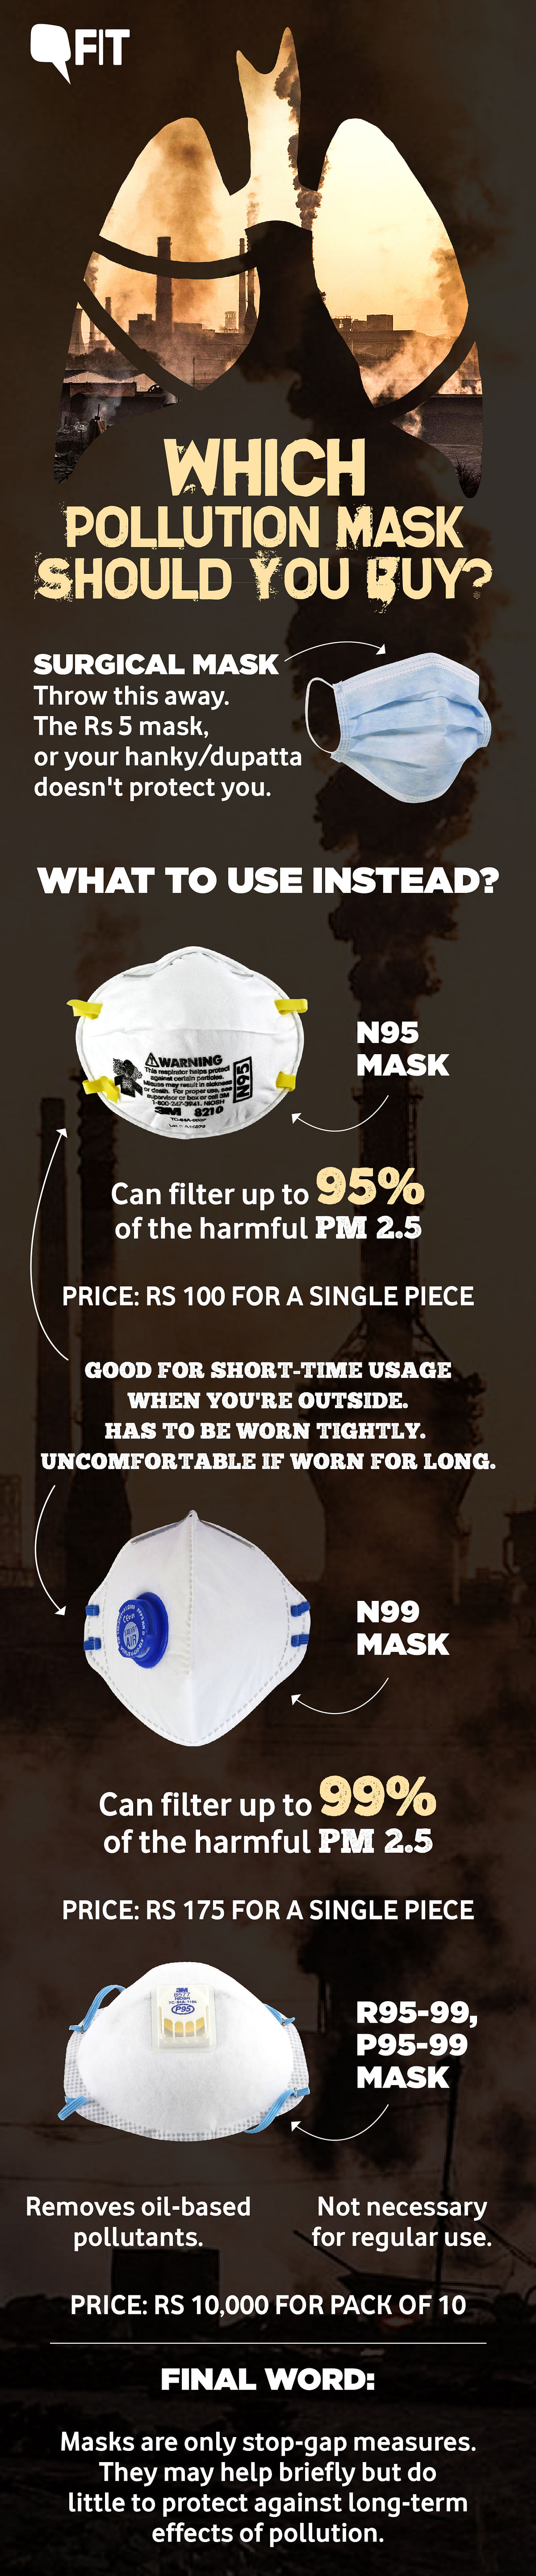 Are you pollution geared? Here are some tips on how to pick the right mask.